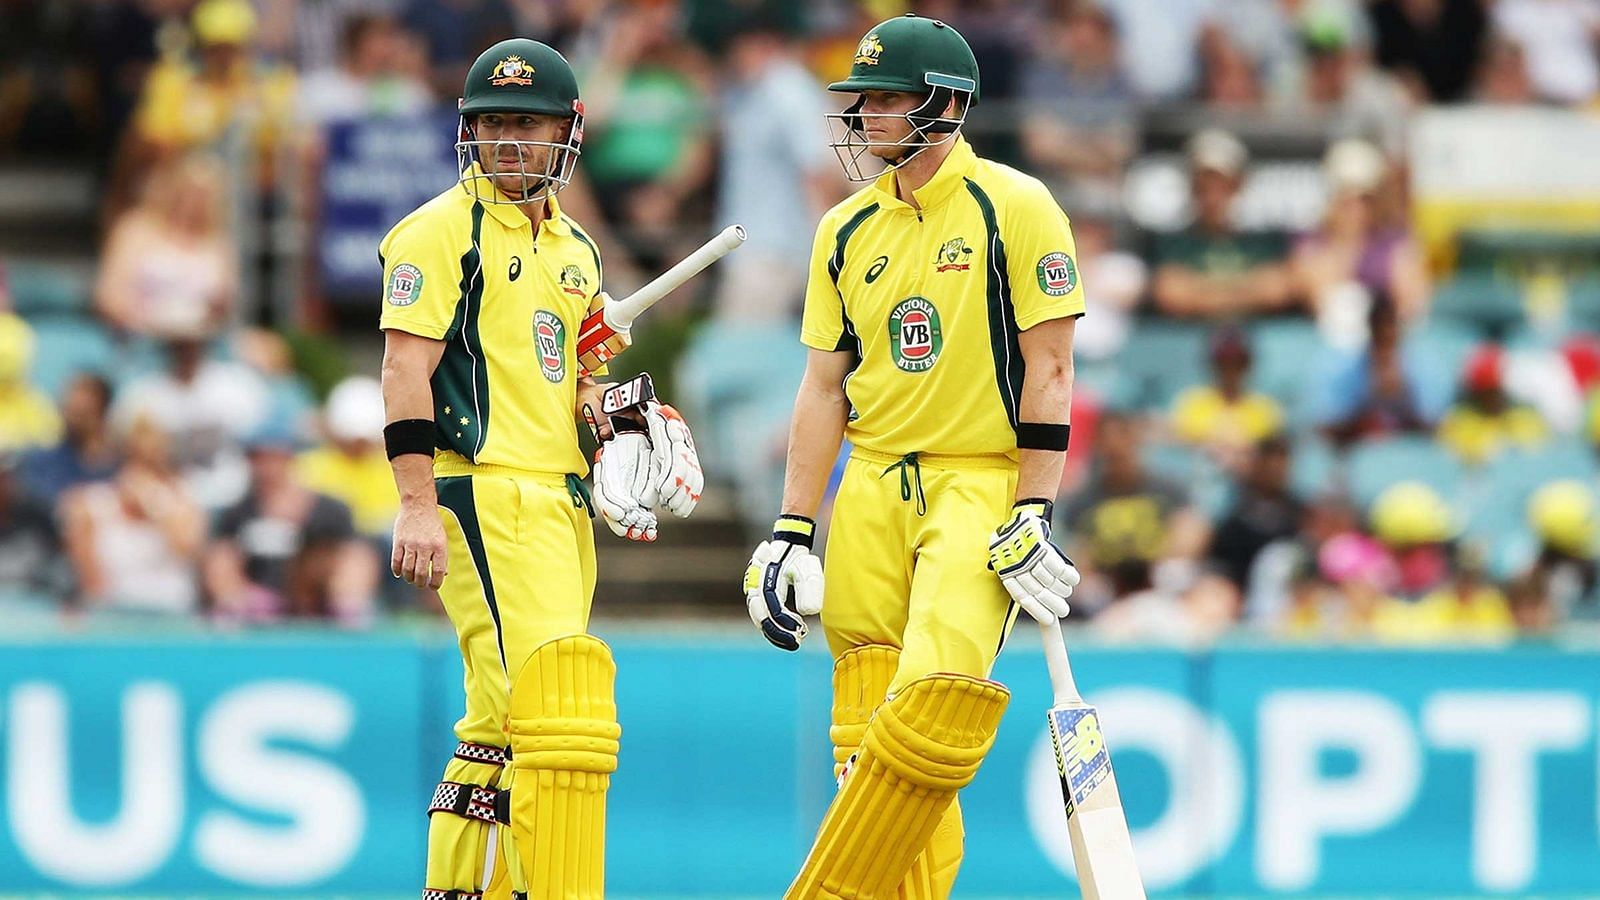 Warner and Smith will be Australia’s batting mainstay in the 2019 World Cup.&nbsp;